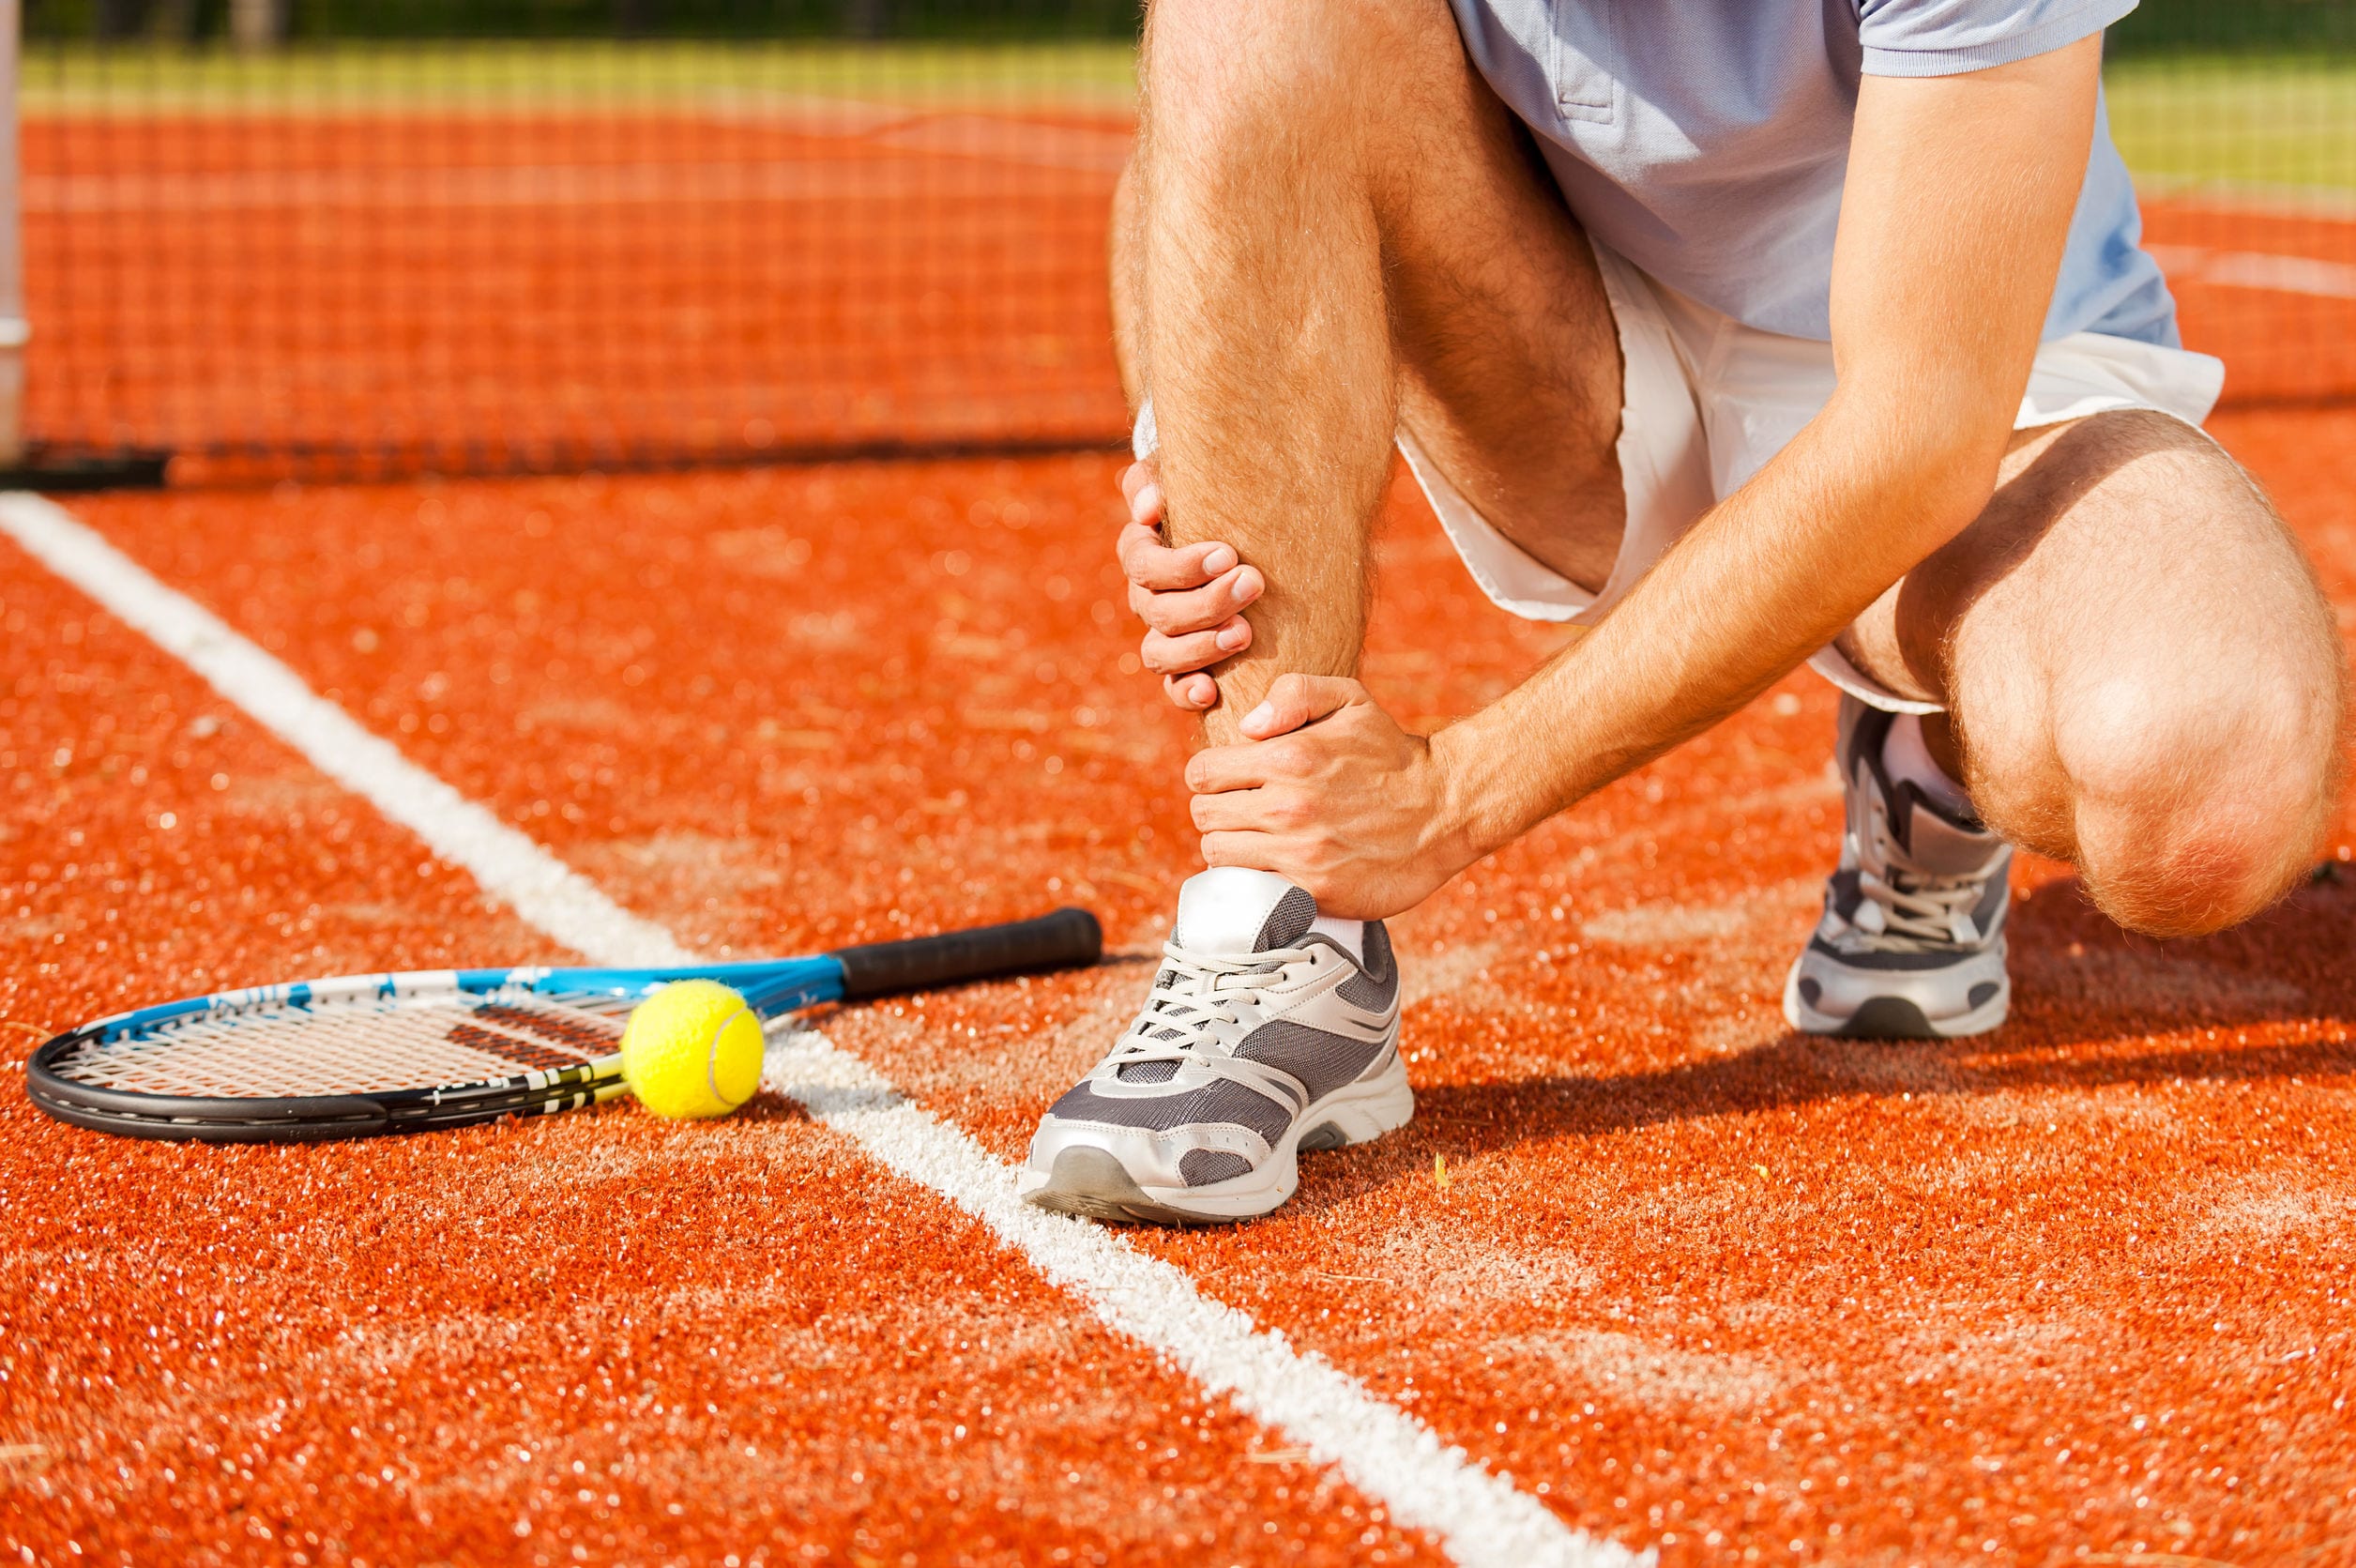 Tennis Injuries: Why Chiropractic Is the Answer for Many of Them